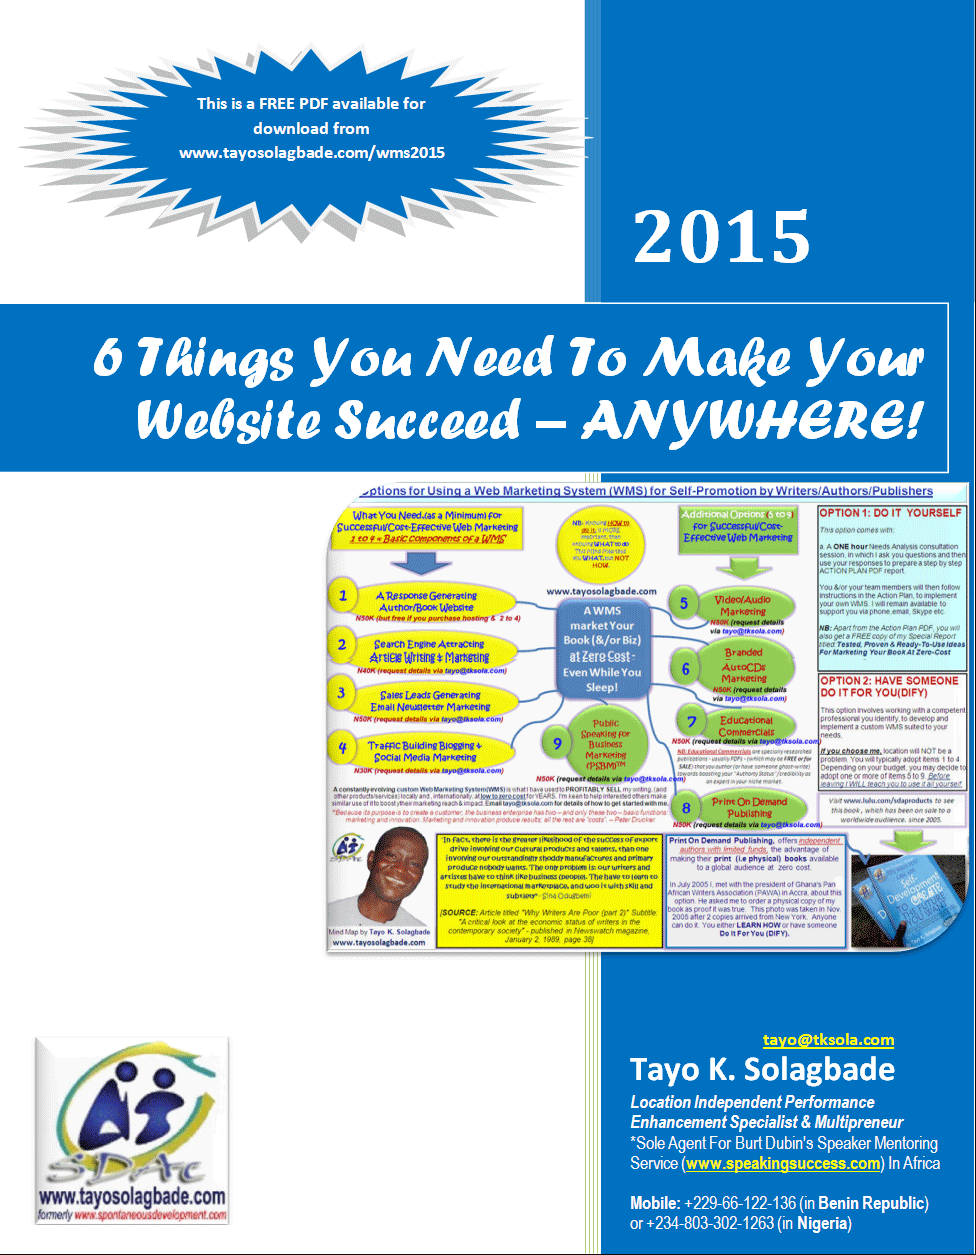 [FREE PDF] 6 Things You Need To Make Your Website Succeed - ANYWHERE! Click to download PDF!